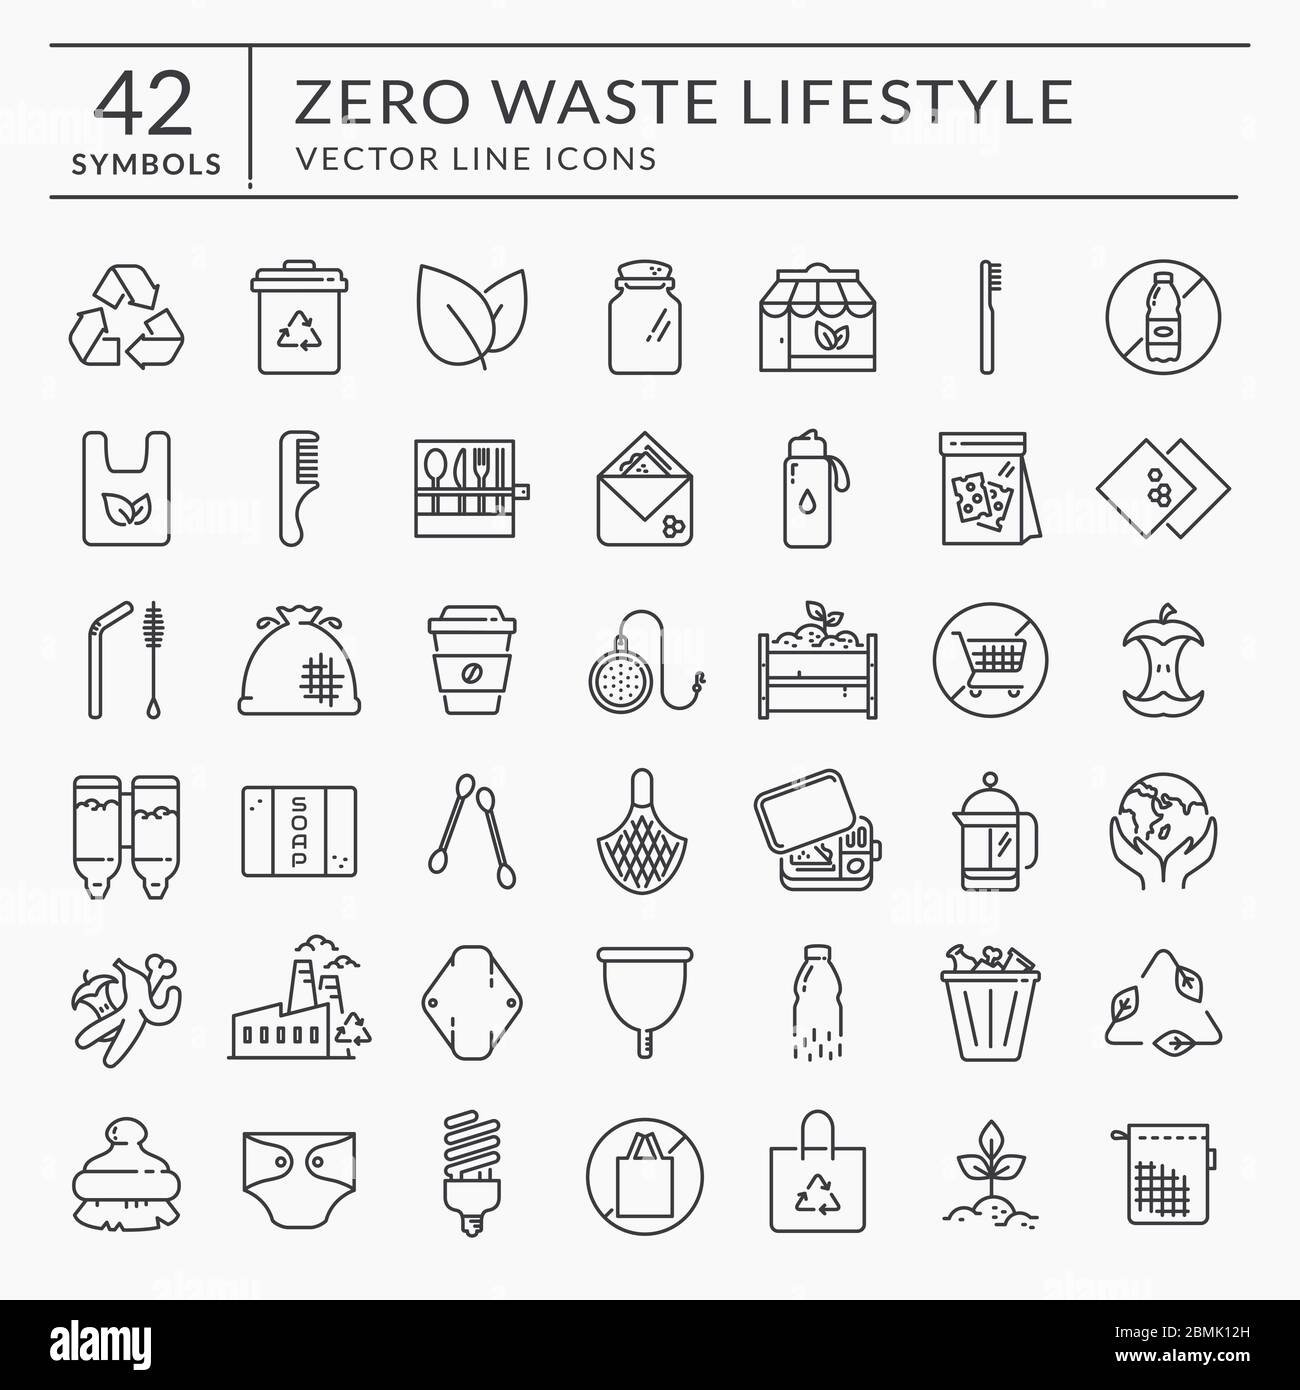 Zero waste line icons. Vector outline symbols isolated on white background. Recycling, reusable items, plastic free, save the Planet and eco lifestyle Stock Vector